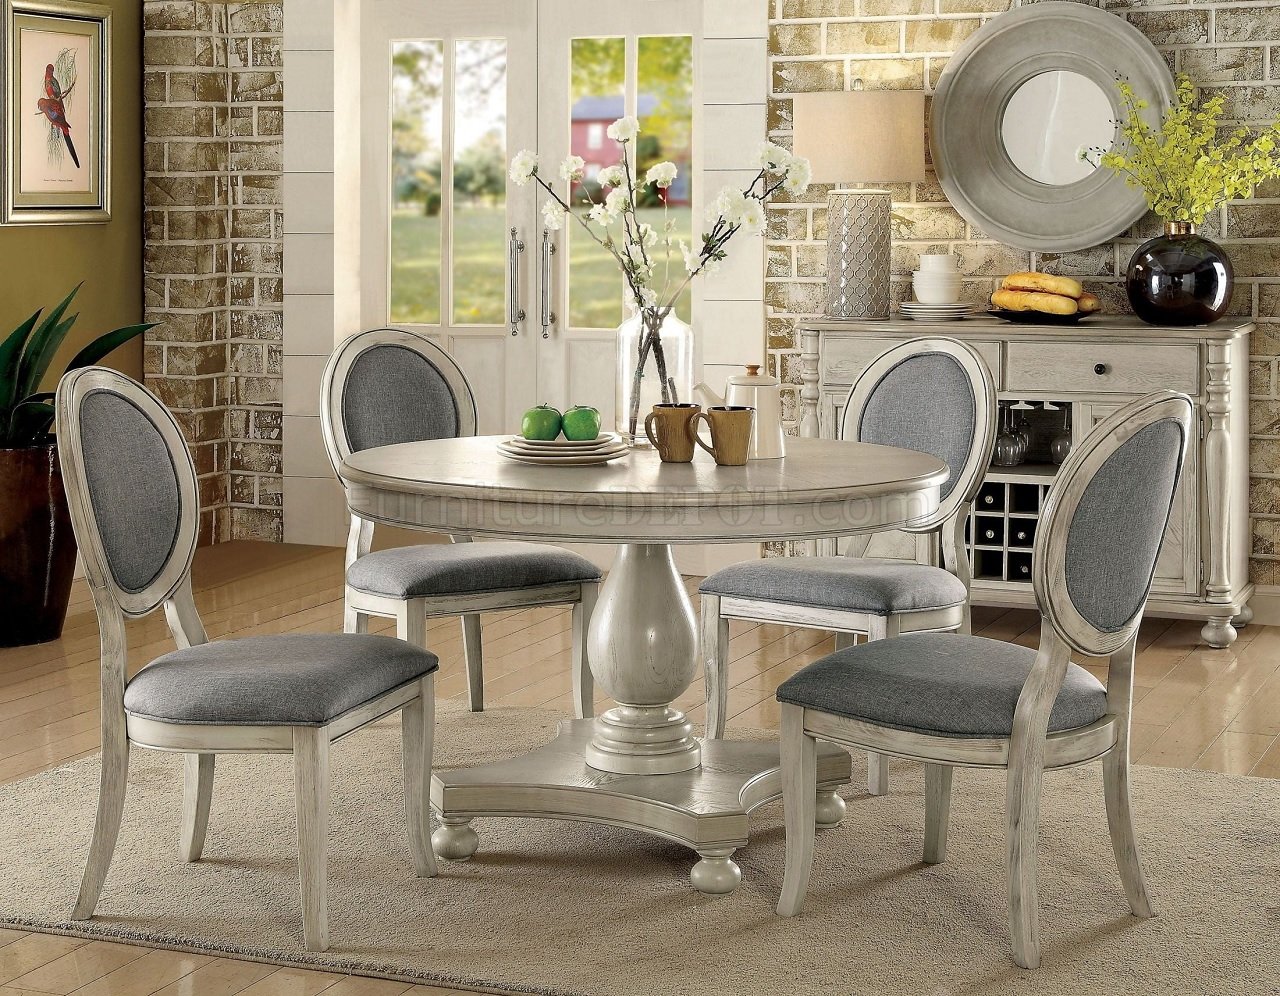 48 Inch Round Dining Room Table With Chairs